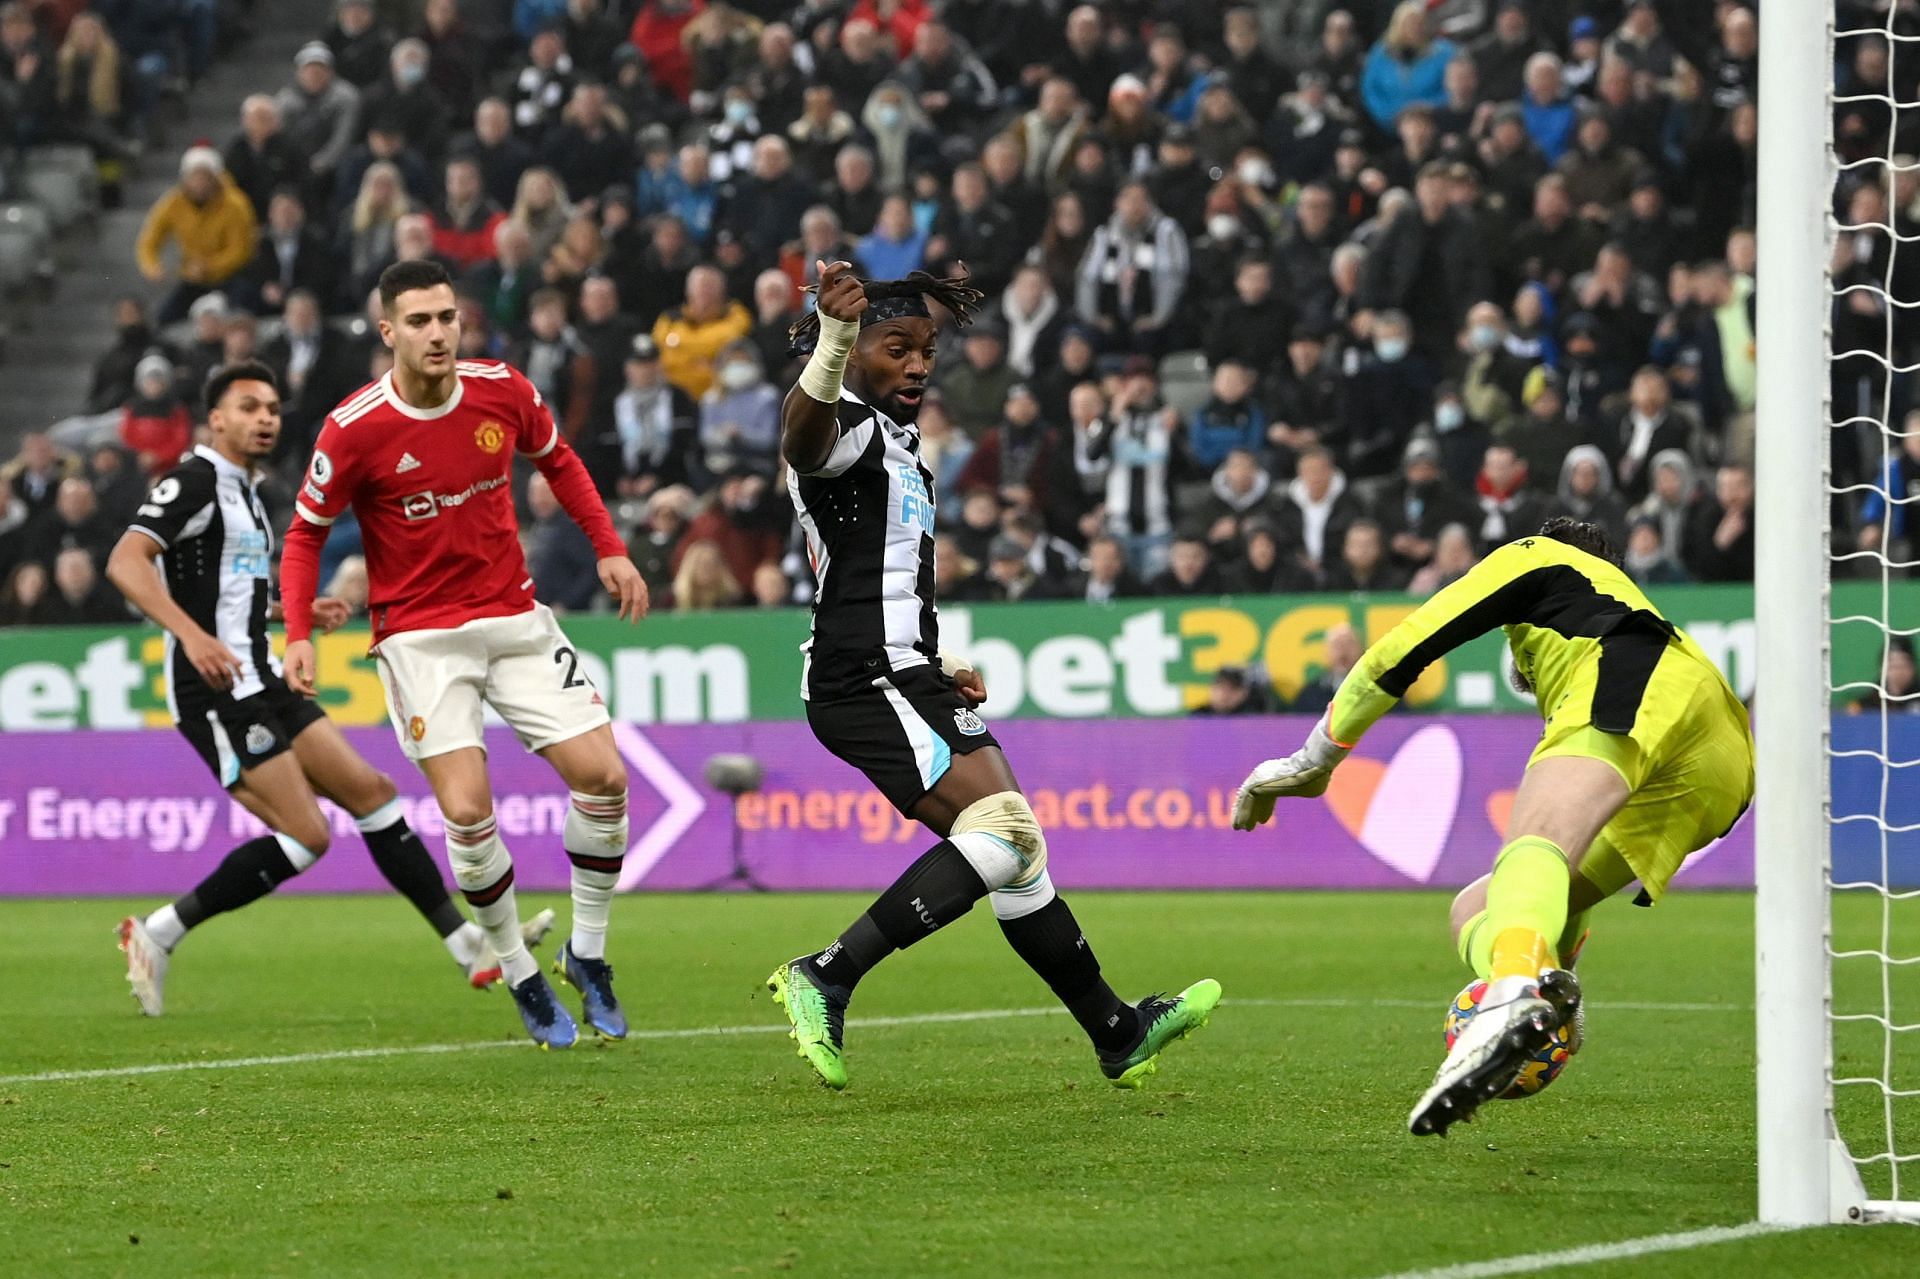 Newcastle United and Manchester United played out an engrossing 1-1 draw